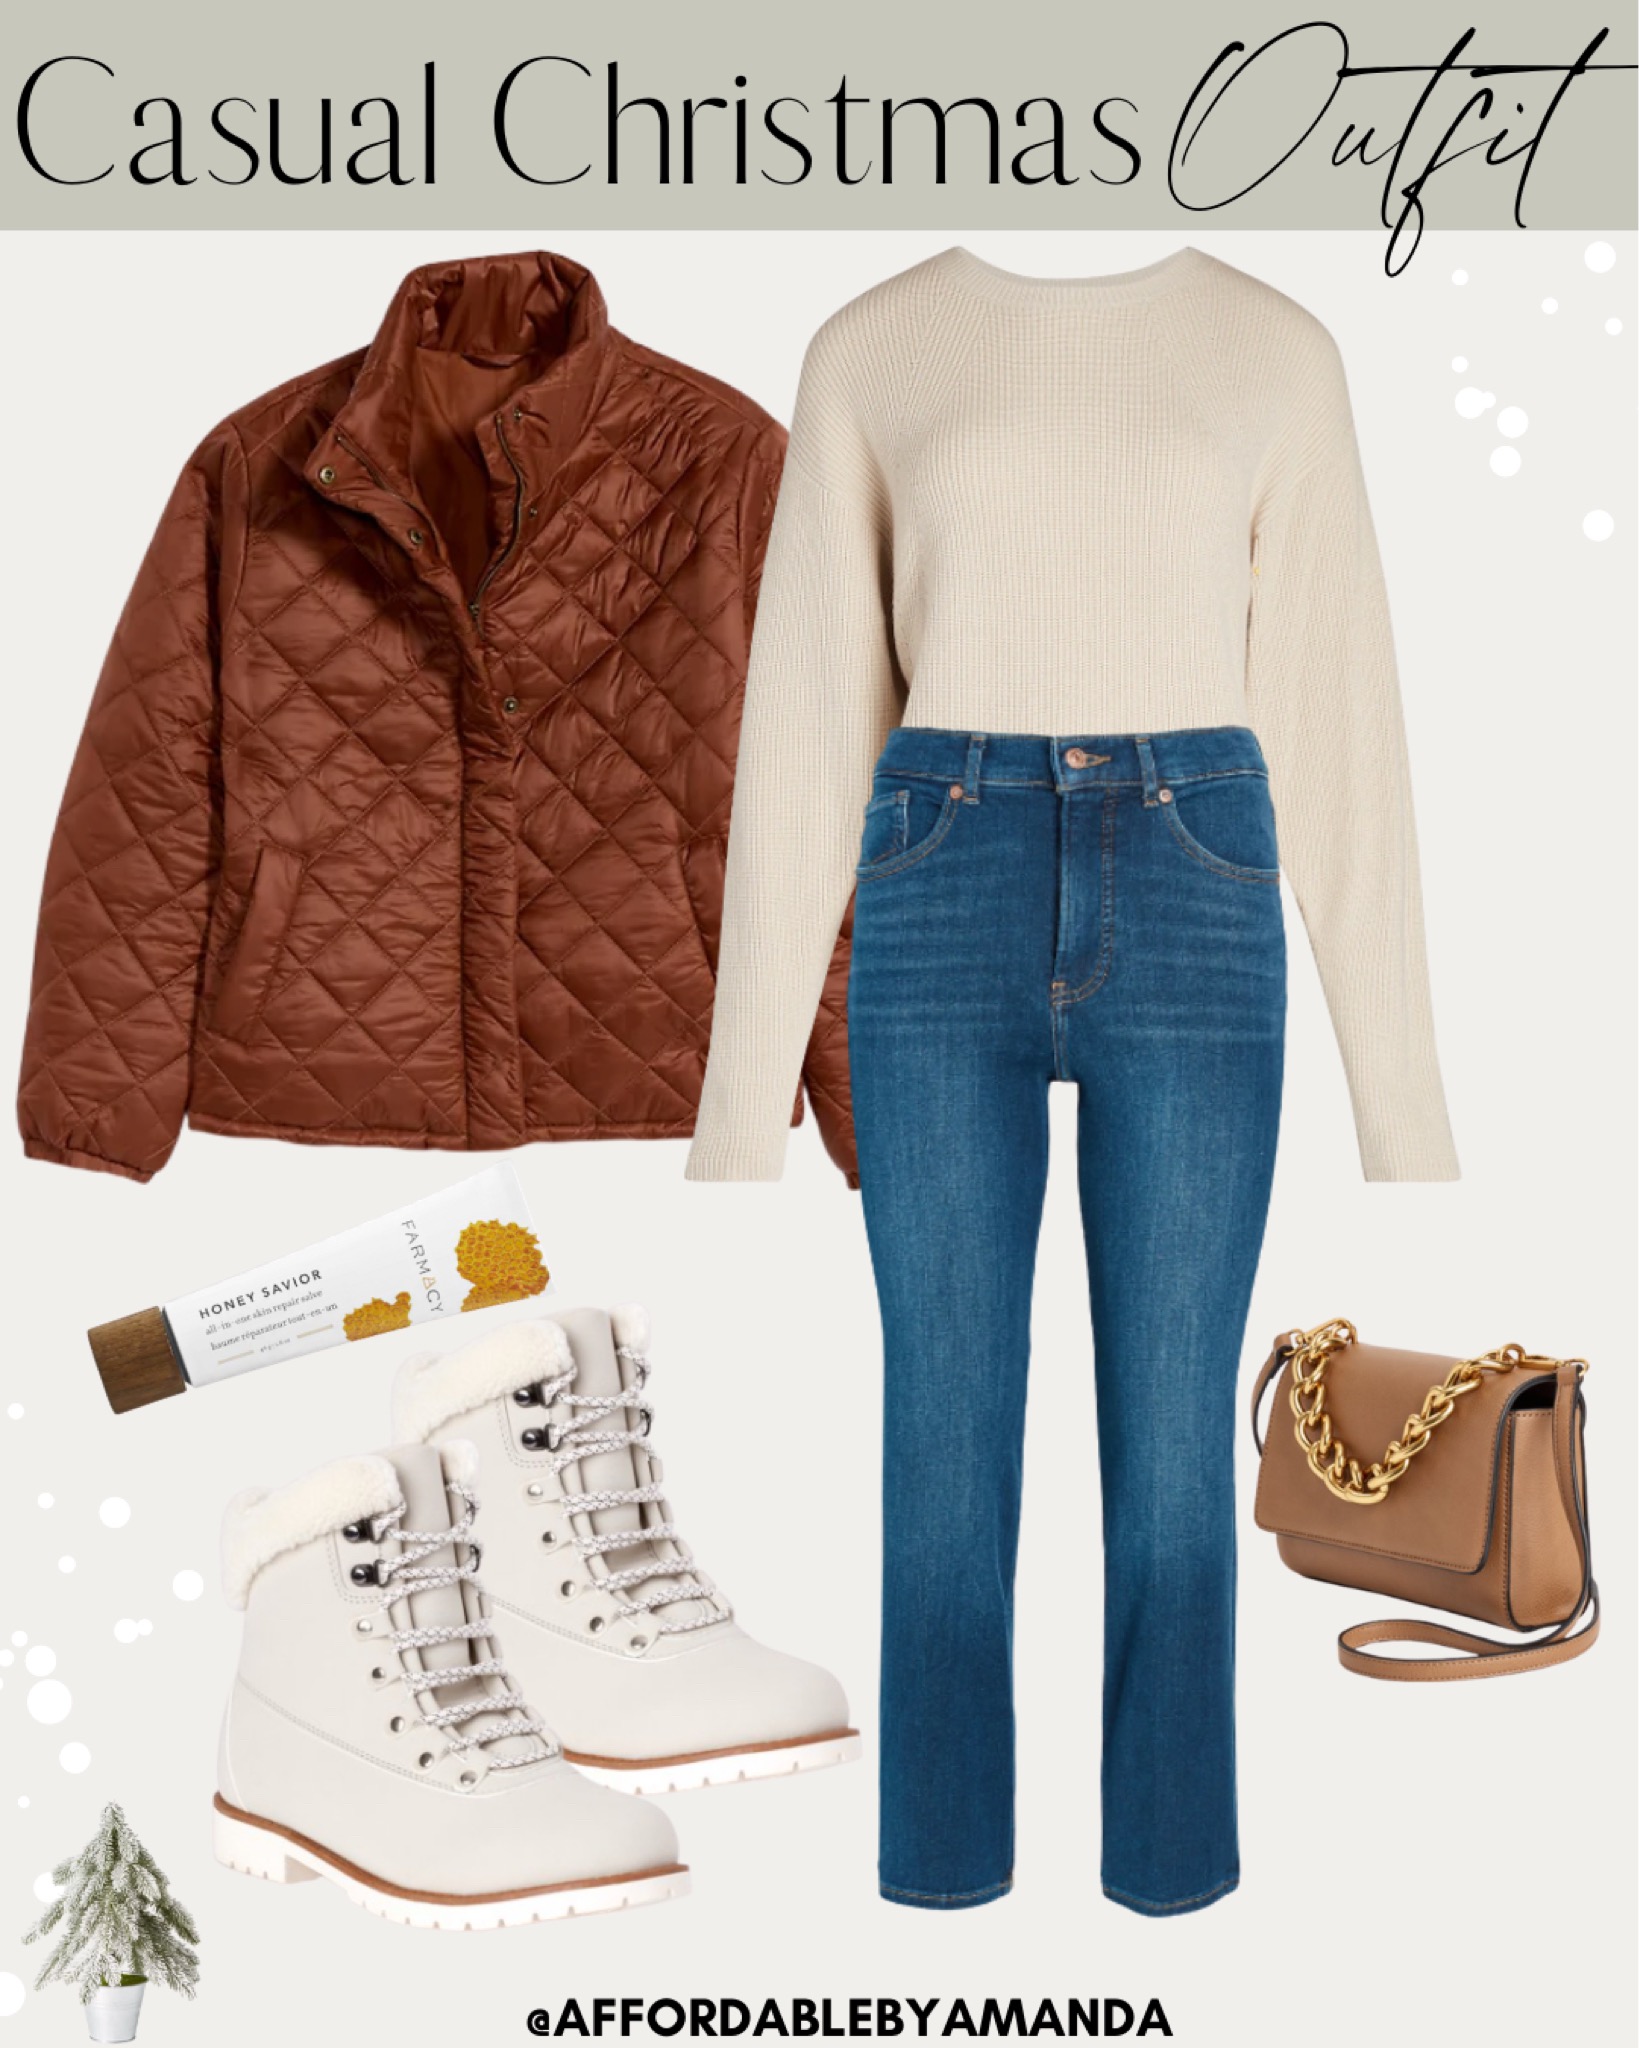 Lightweight Diamond-Quilted Nylon Puffer Jacket for Women - Affordable by Amanda shares Christmas Outfit Inspiration